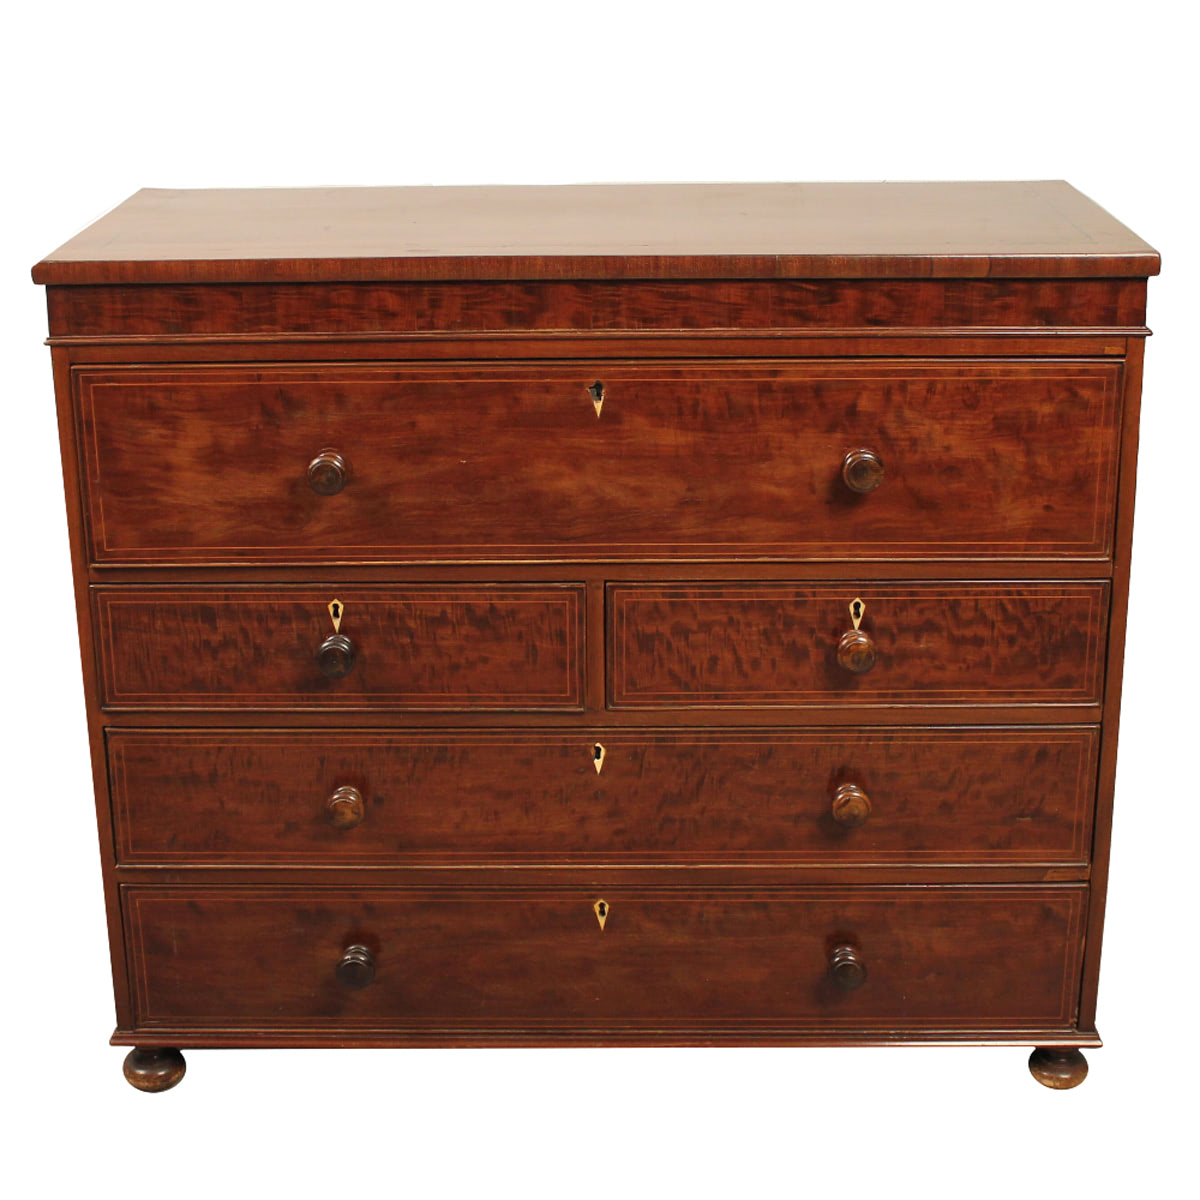 Cassettone con ribalta e quattro cassetti - Chest of drawers with flap and four drawers